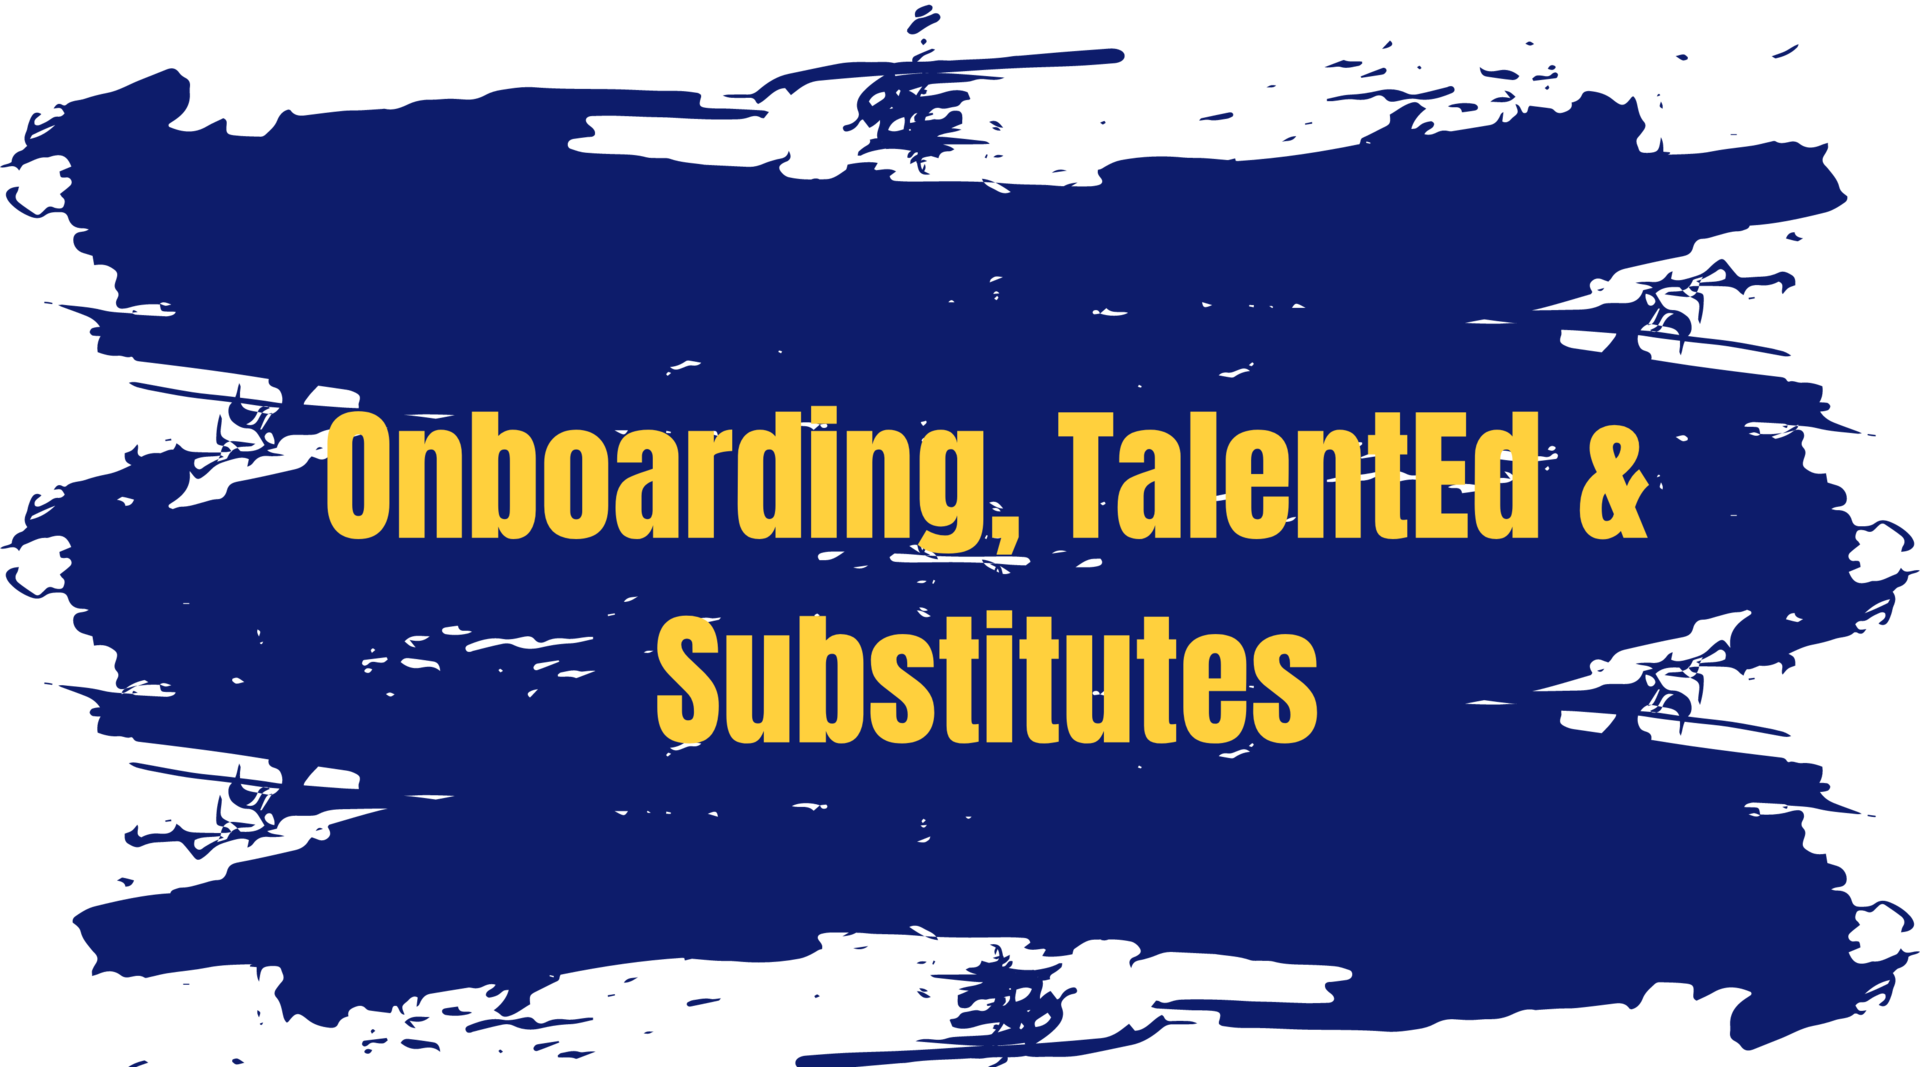 Onboarding, TalentEd, and Substitutes